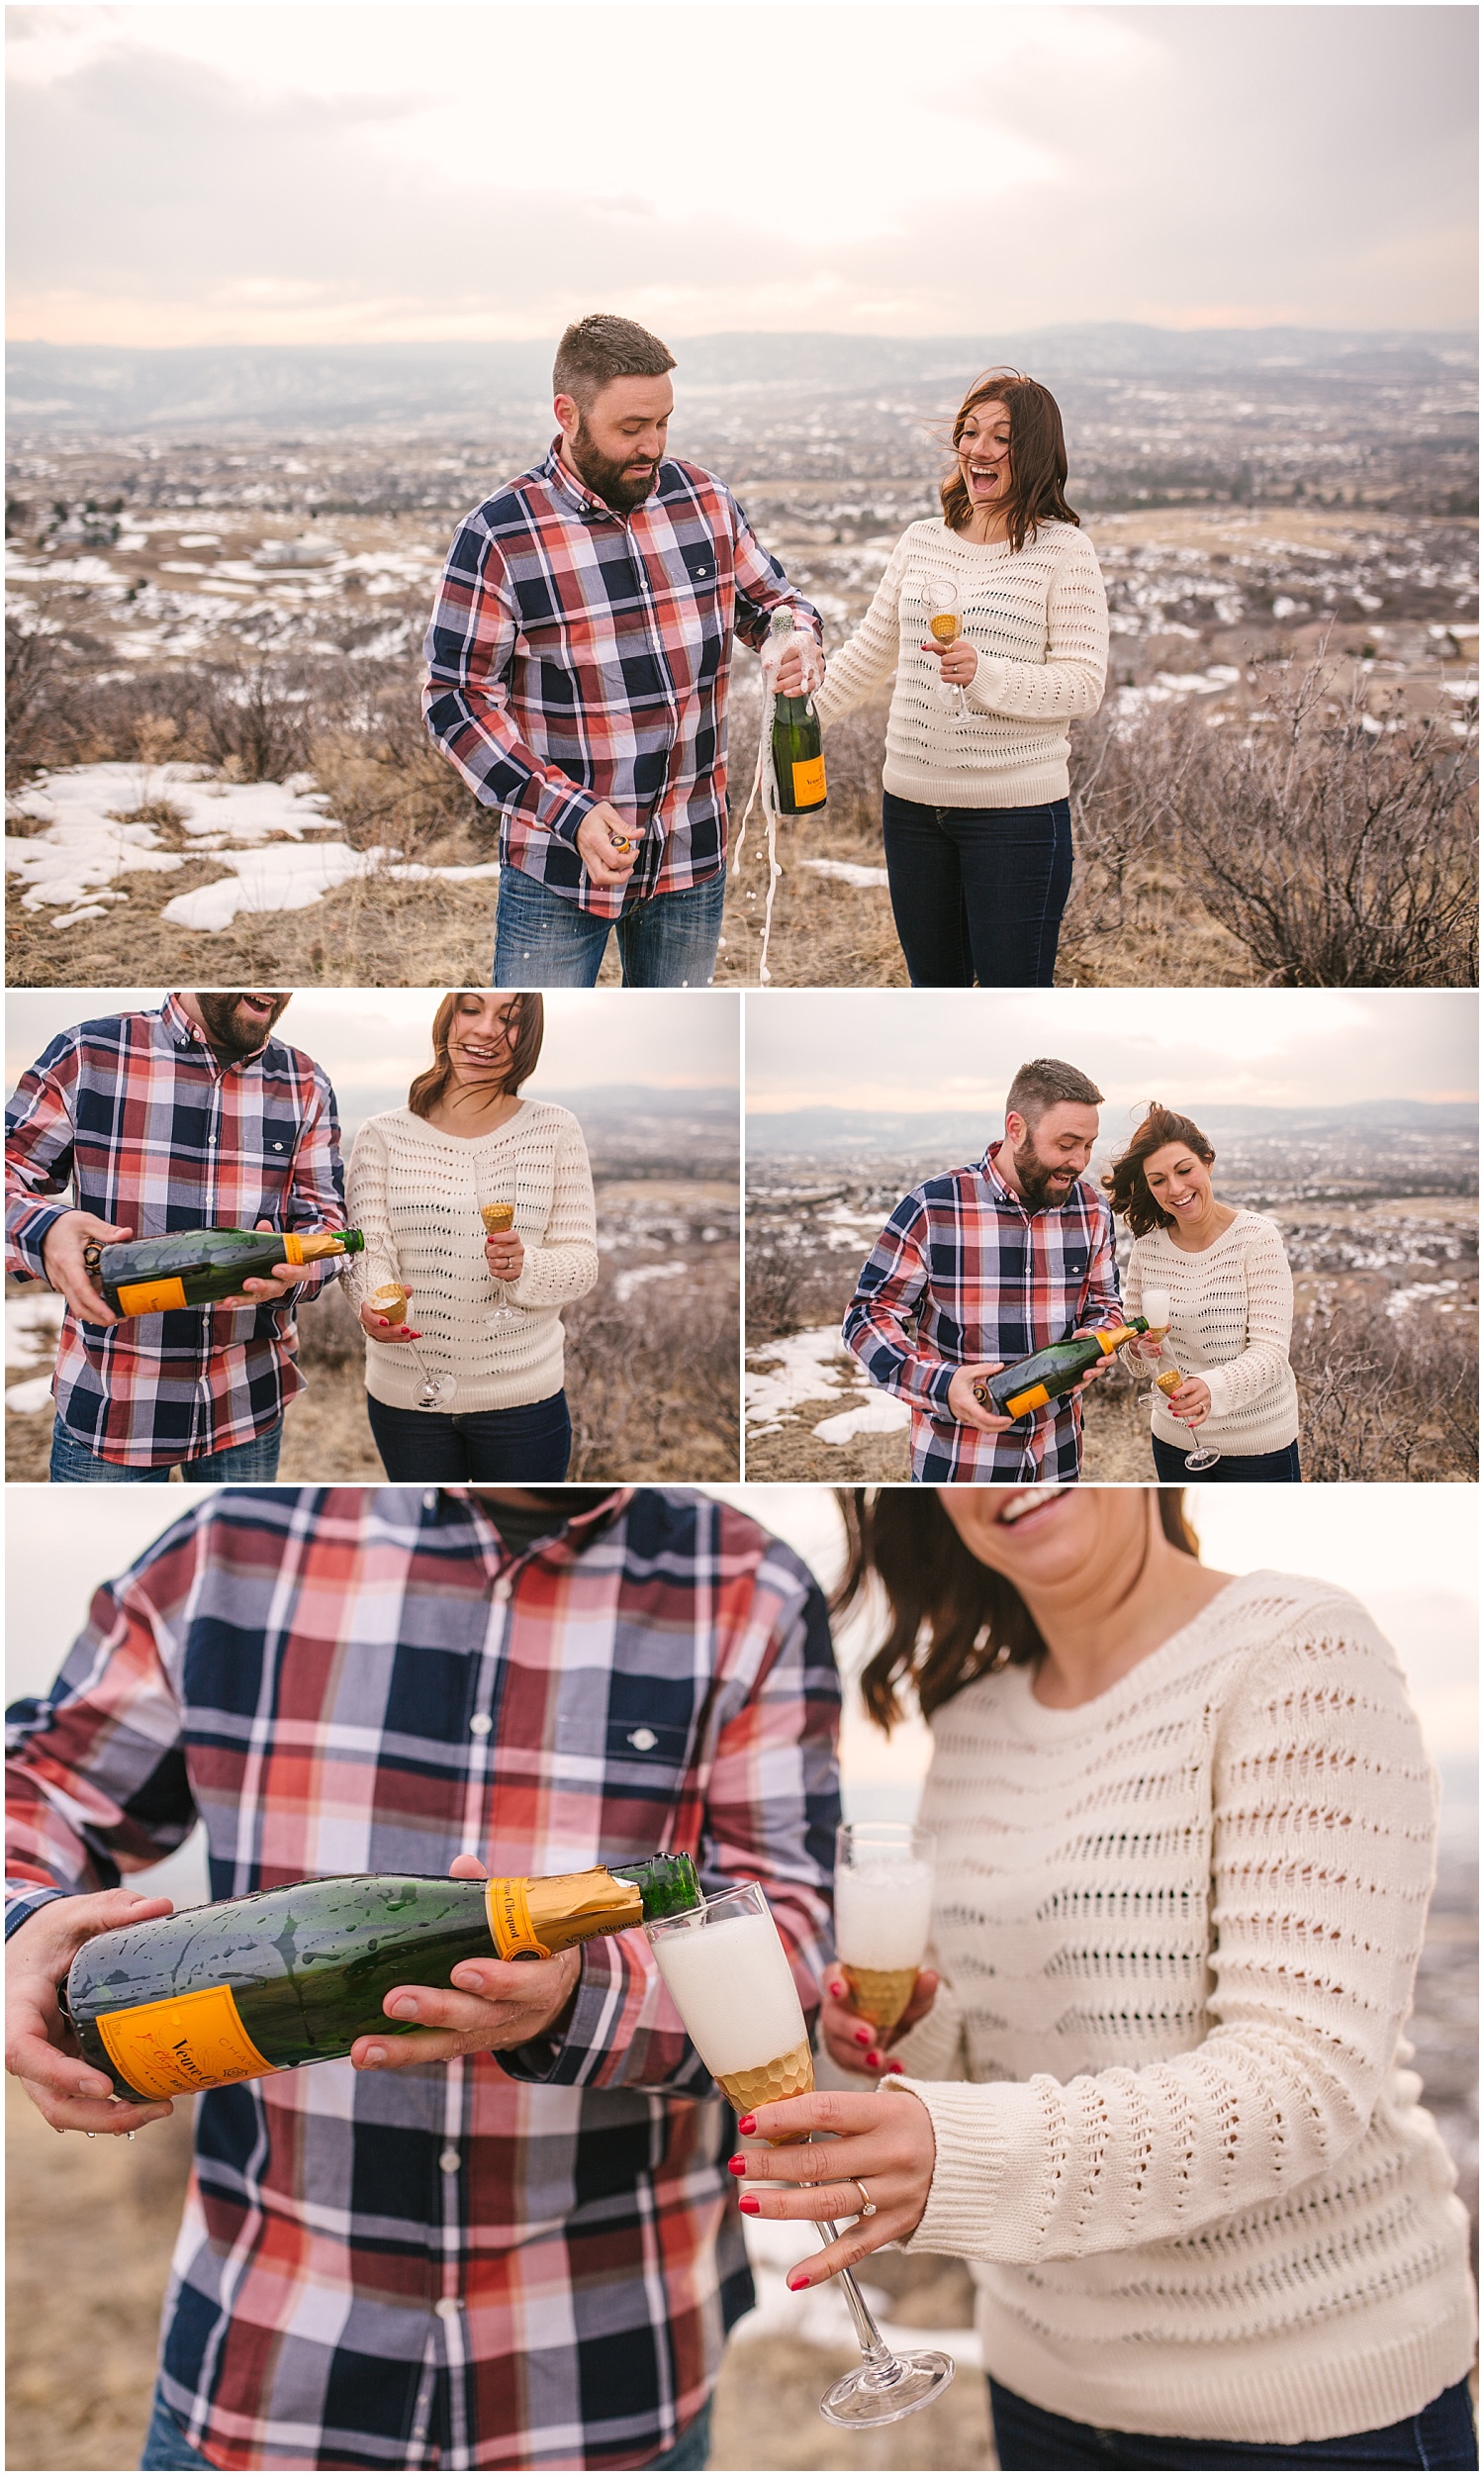 Popping champagne for Castle Rock Colorado engagement photos.